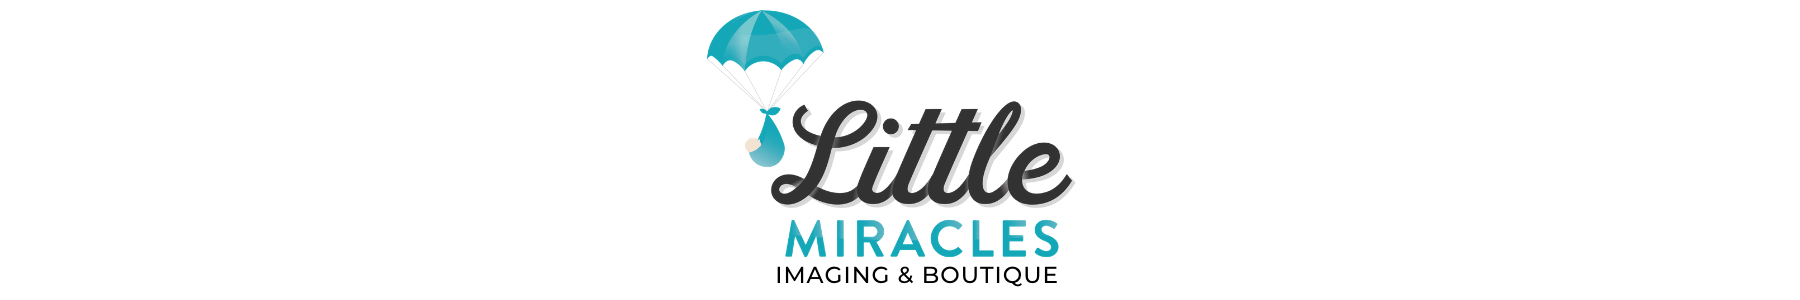 Little Miracles Imaging and boutique logo